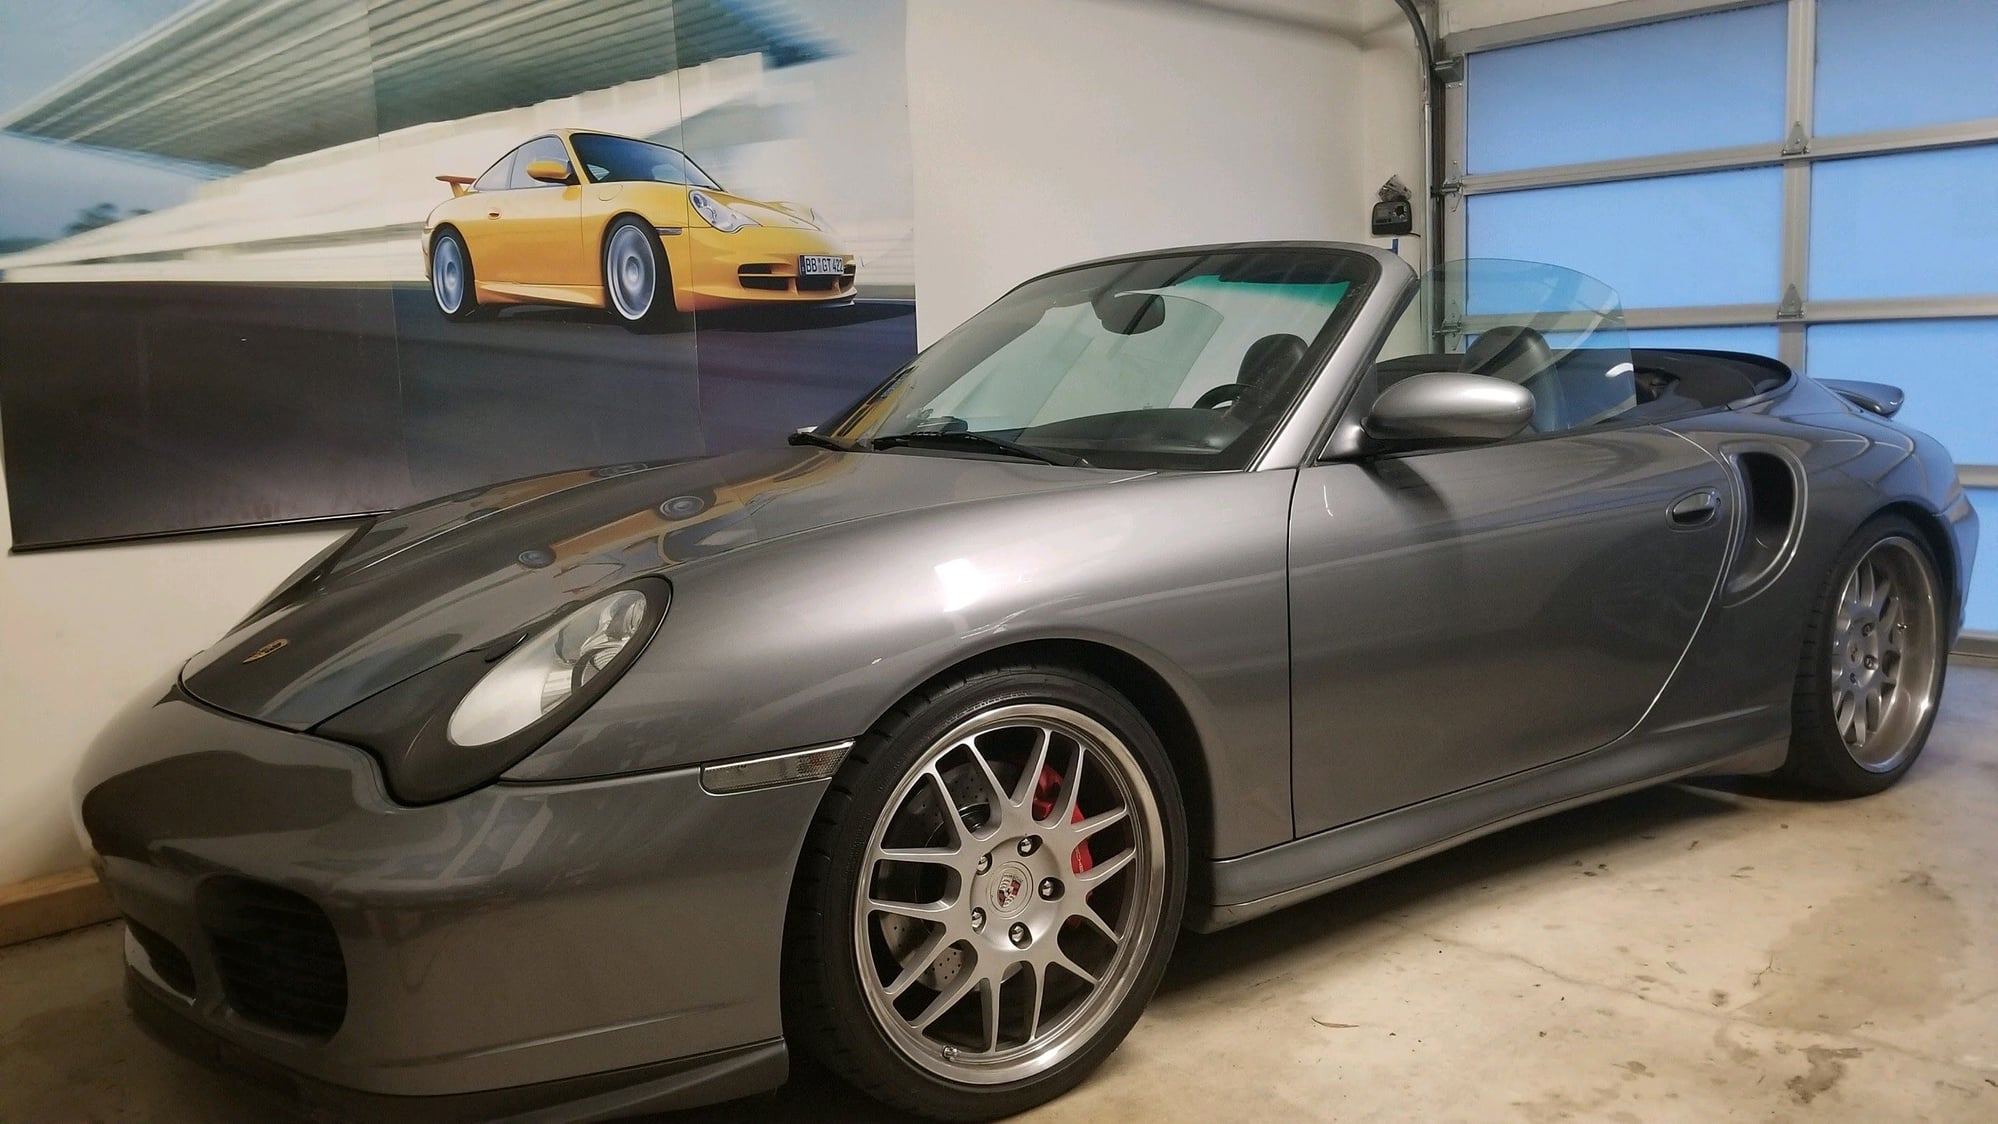 2004 Porsche 911 - 2004 Turbo Cab, 63k miles, New Ohlins coil-overs, $45,000 on OEM stock wheels - Used - VIN wwwwwwwwwwwwwwwww - 63,500 Miles - 6 cyl - AWD - Manual - Convertible - Gray - Rancho Palos Verdes, CA 90275, United States